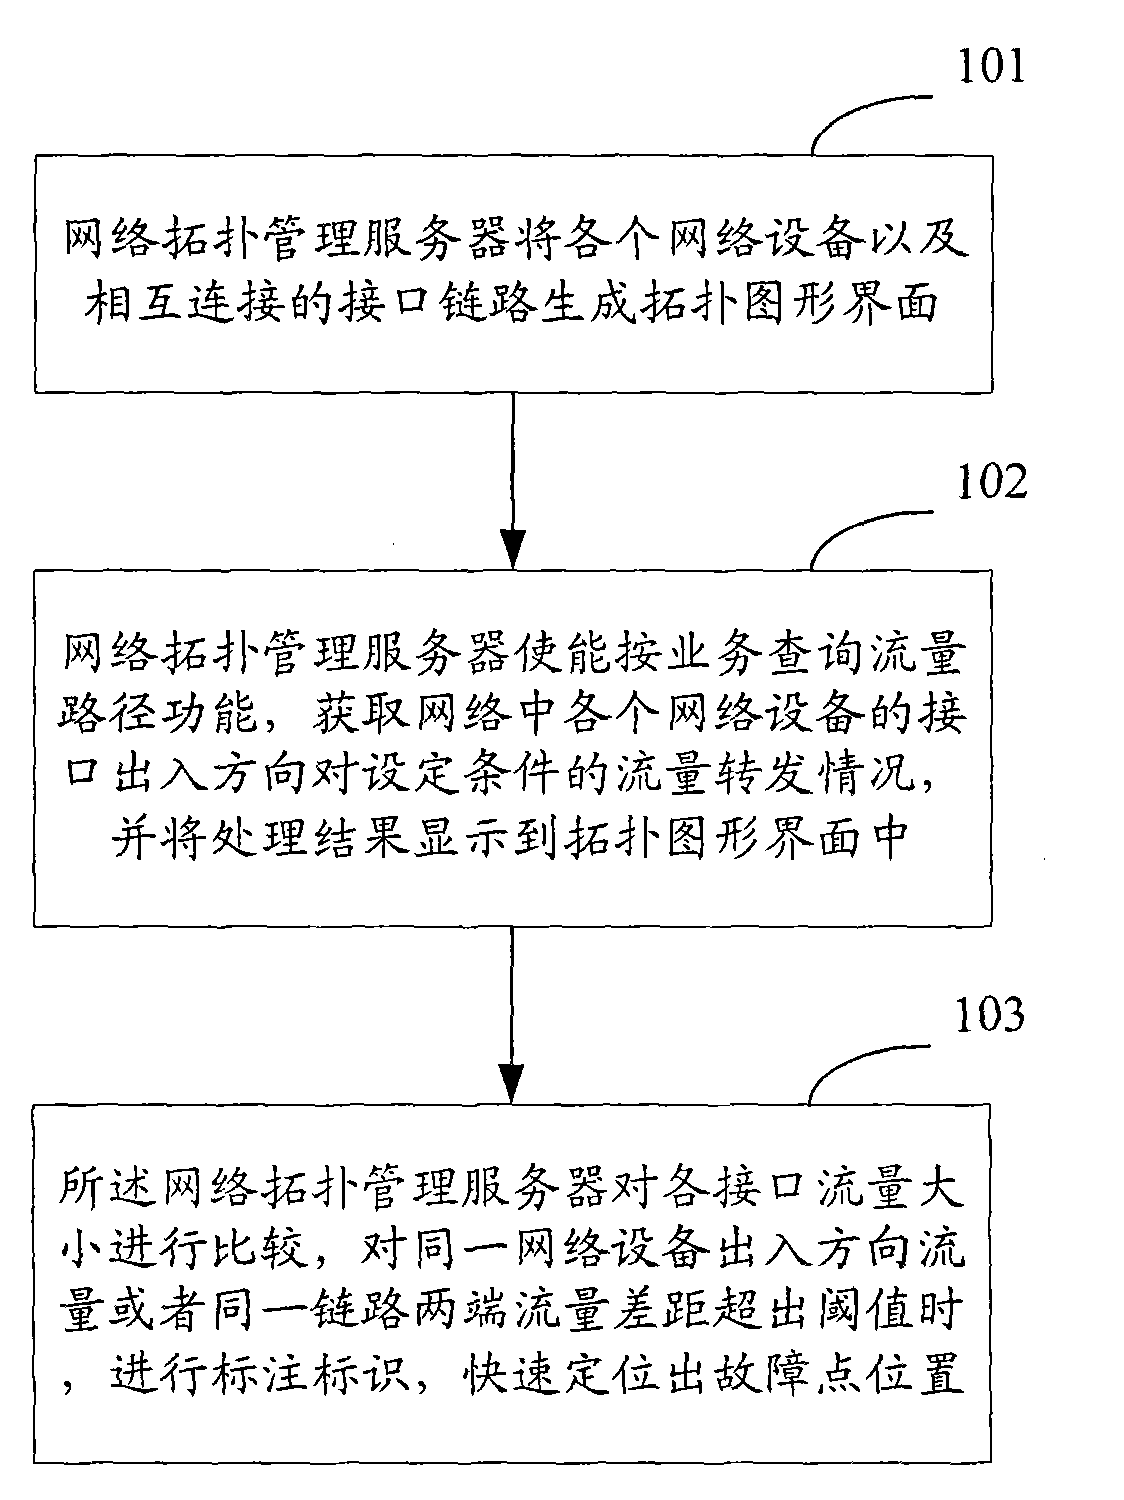 Method and device for flow path discovery and fault fast positioning